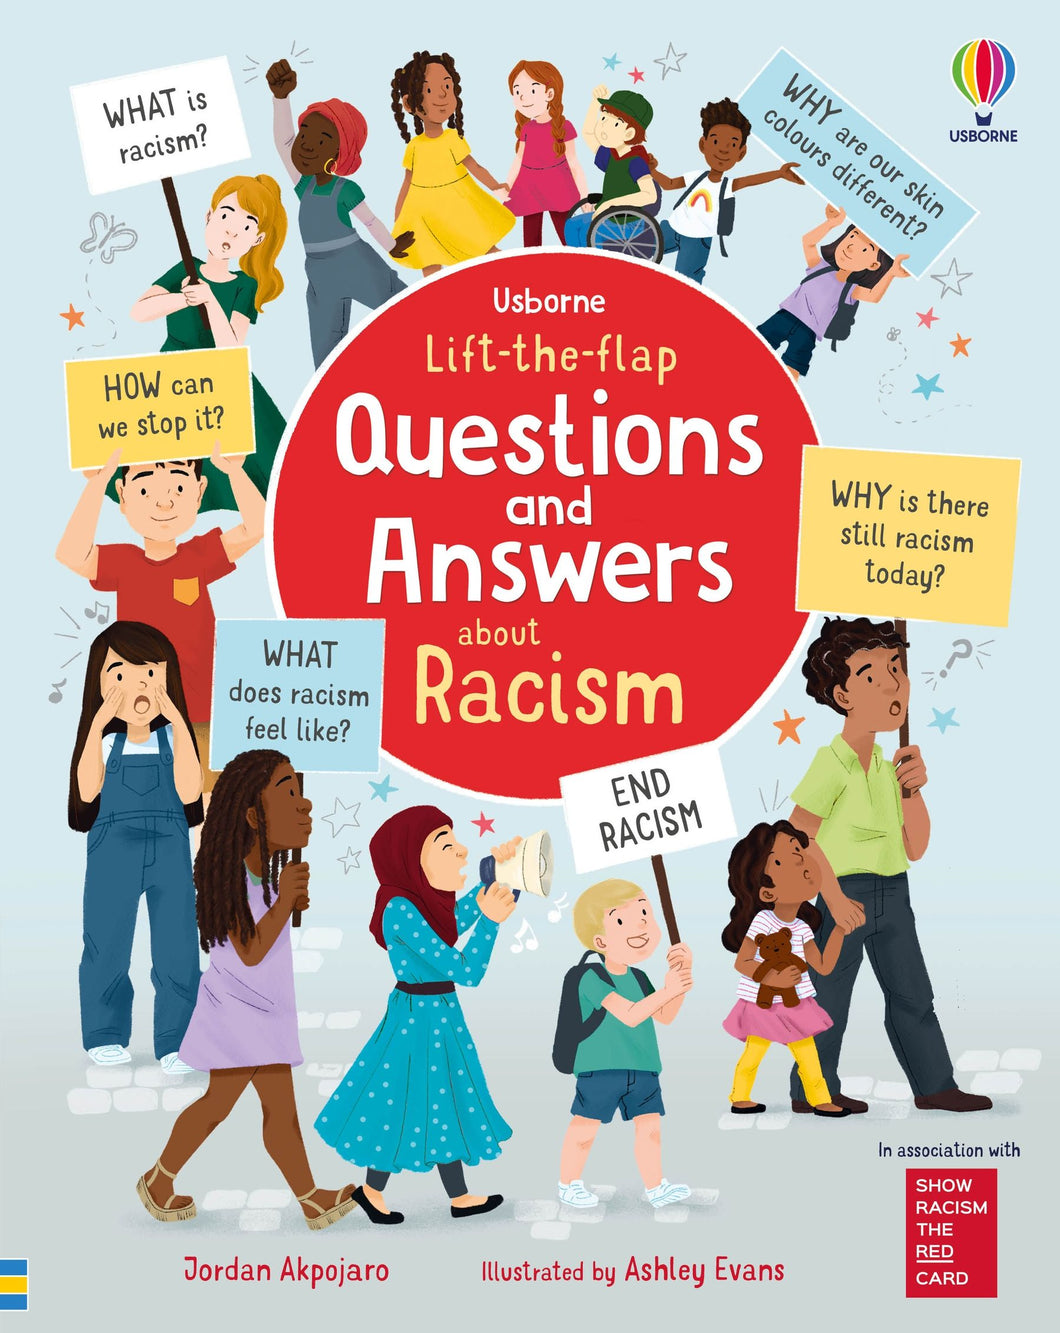 Lift-the-flap Questions and Answers: About Racism